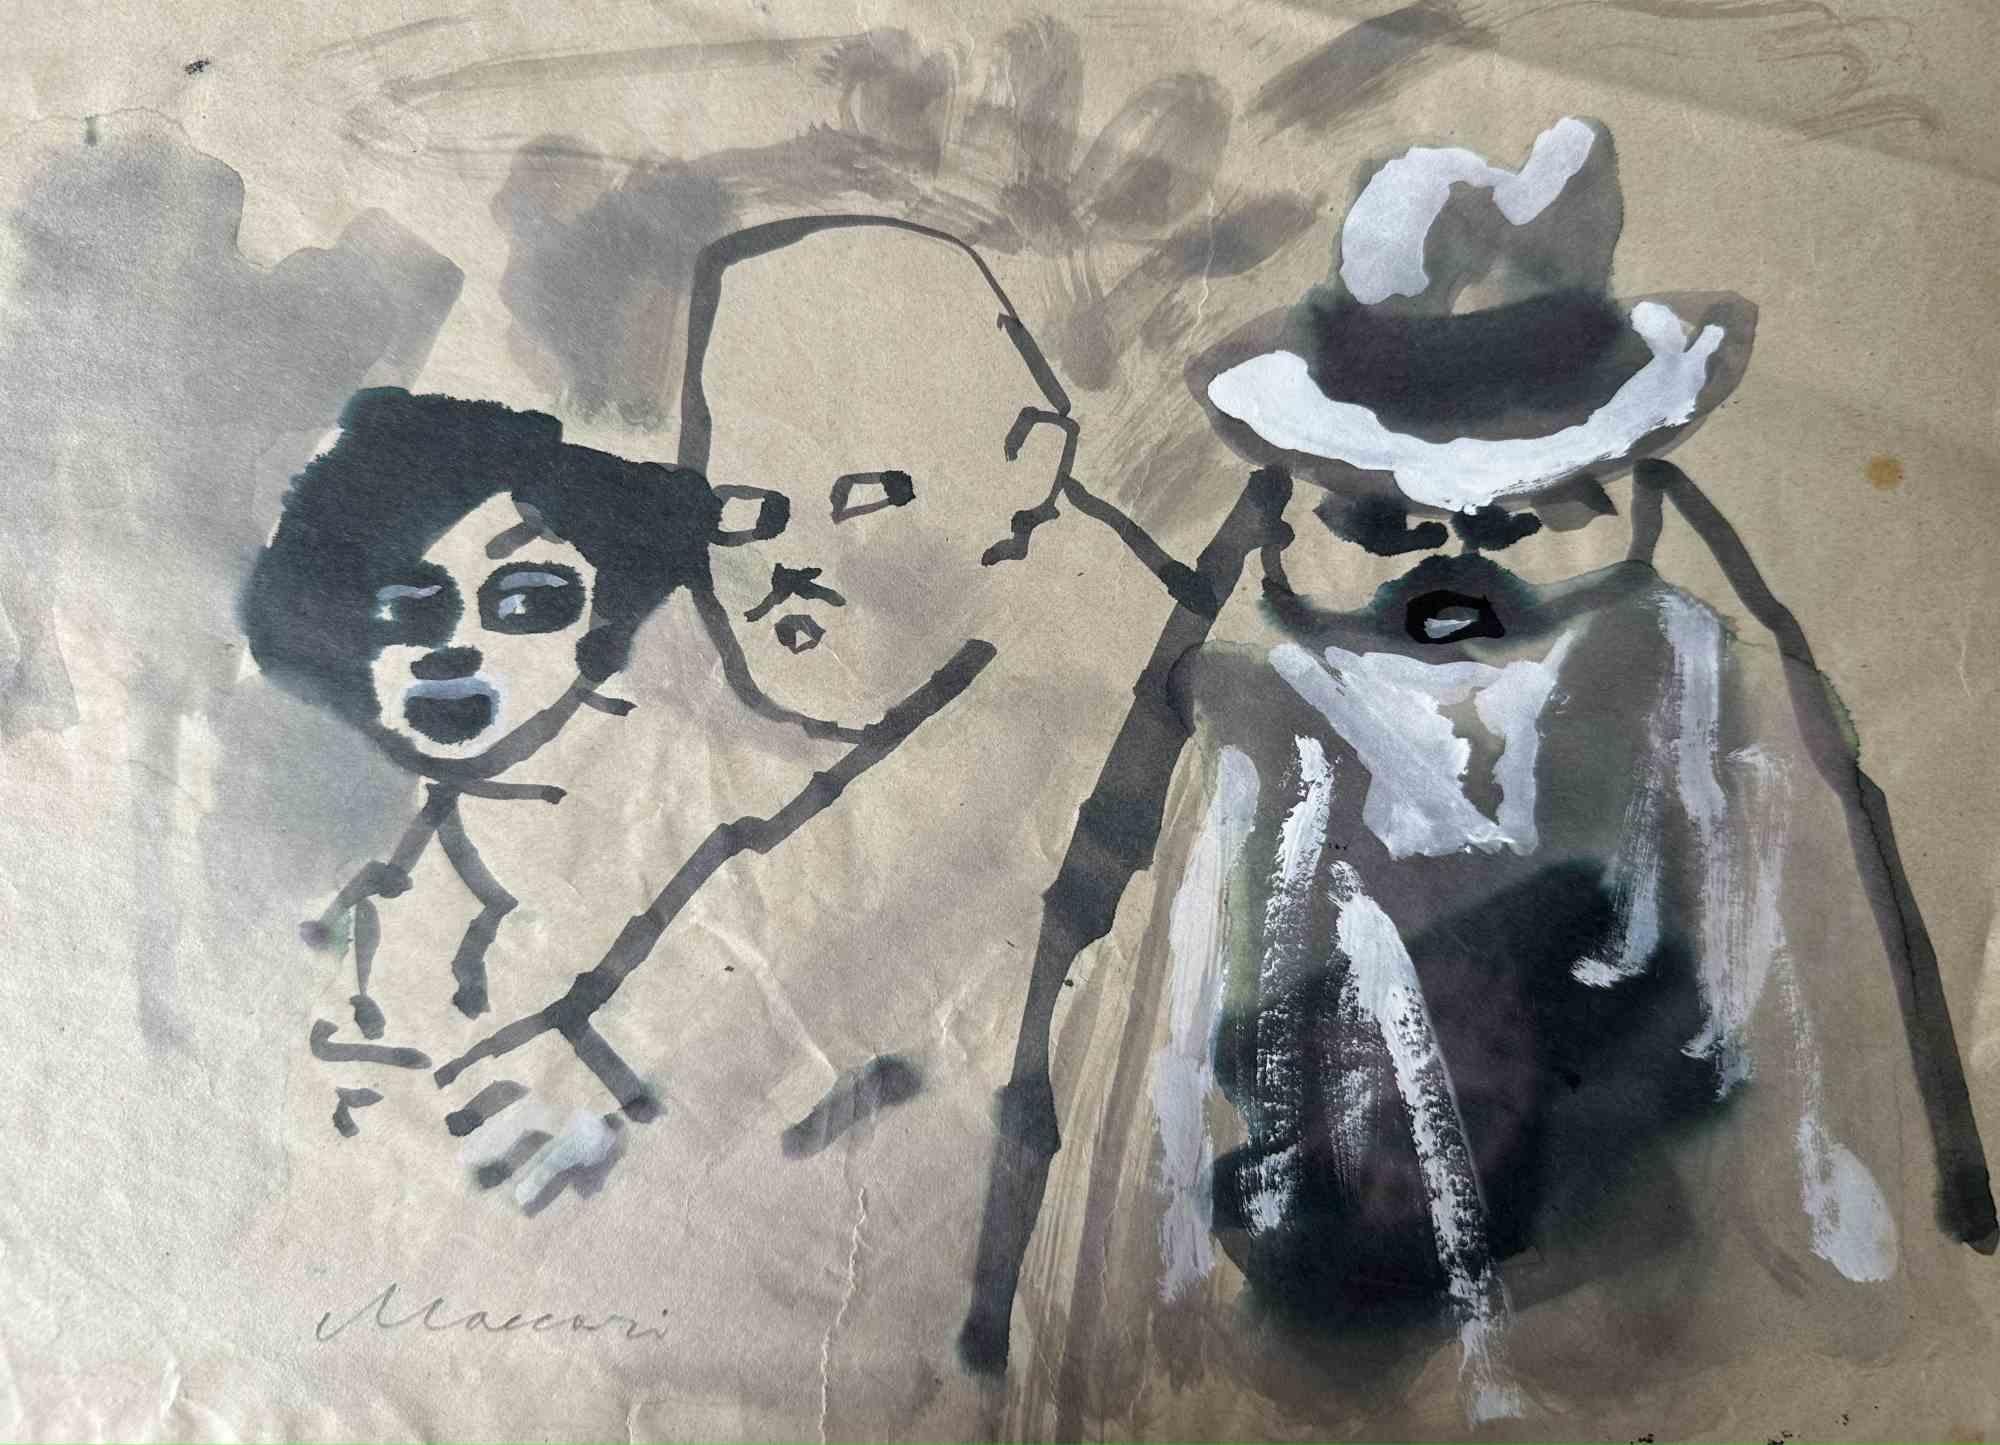 Figures is a watercolor and white lead Drawing realized by Mino Maccari  (1924-1989) in the 1950s.

Hand-signed on the lower.

Good conditions.

Mino Maccari (Siena, 1924-Rome, June 16, 1989) was an Italian writer, painter, engraver and journalist,